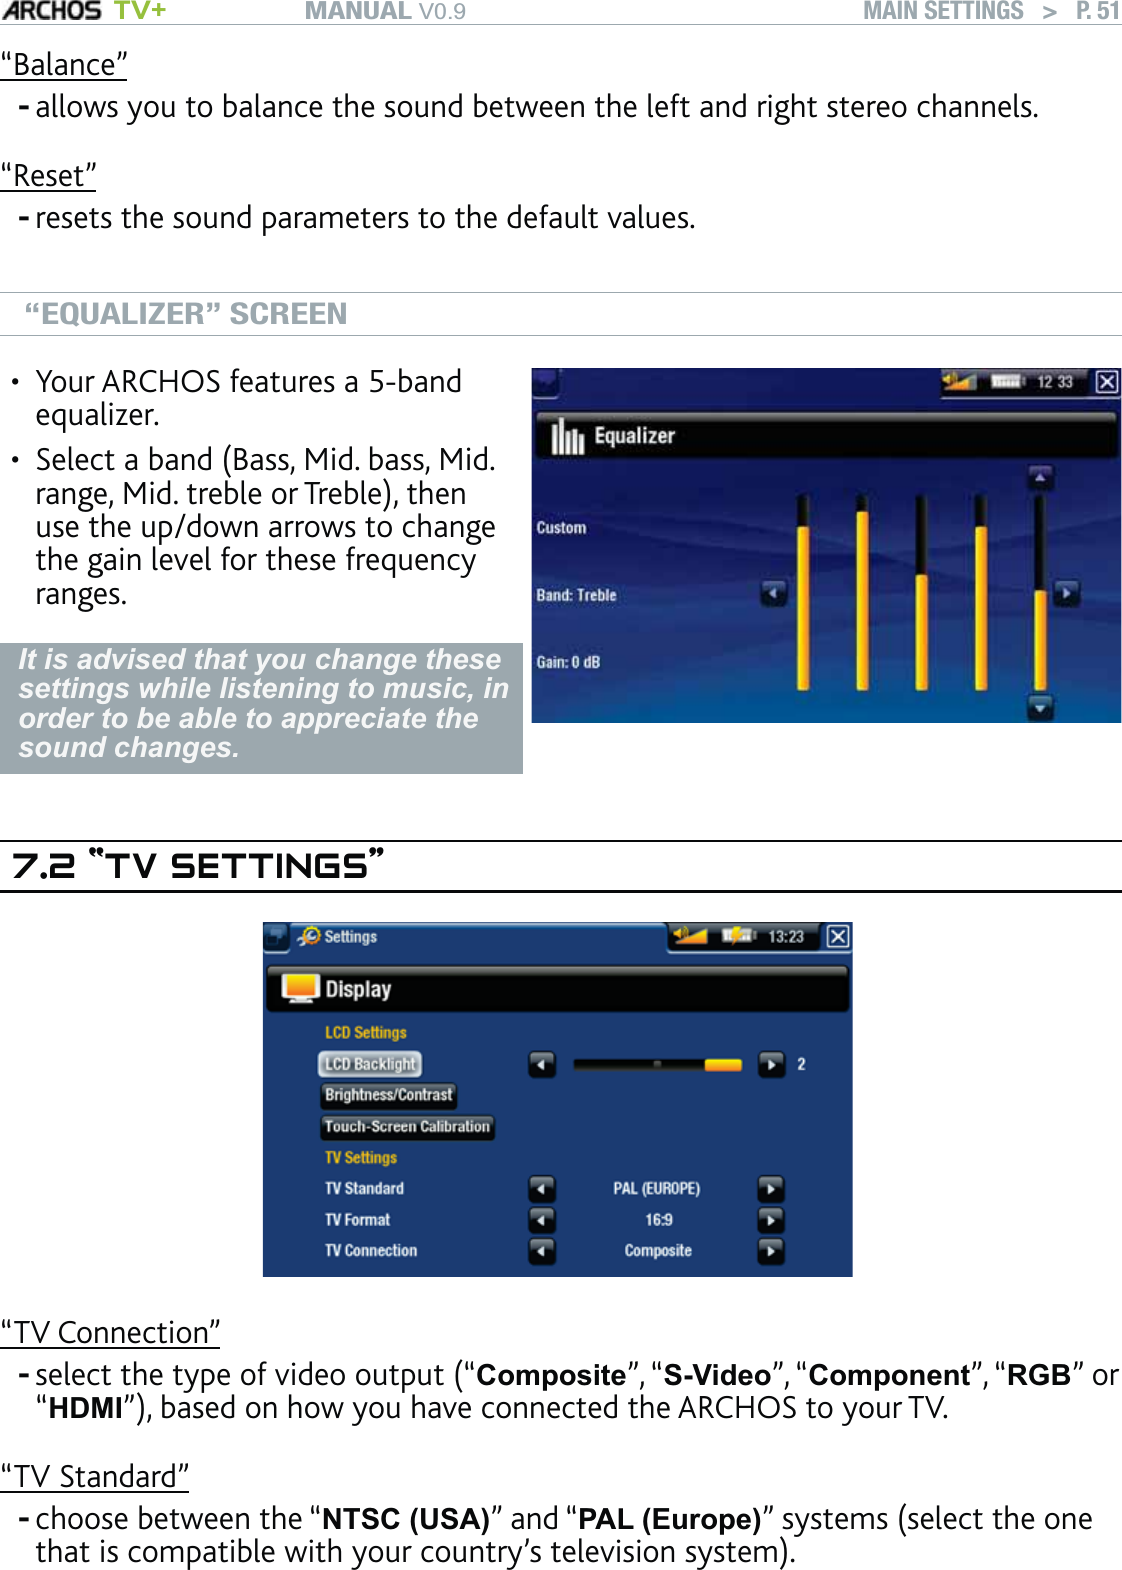 MANUAL V0.9 TV+ MAIN SETTINGS   &gt;   P. 51“Balance”allows you to balance the sound between the left and right stereo channels.“Reset”resets the sound parameters to the default values.“EQUALIZER” SCREENYour ARCHOS features a 5-band equalizer.Select a band (Bass, Mid. bass, Mid. range, Mid. treble or Treble), then use the up/down arrows to change the gain level for these frequency ranges.••It is advised that you change these settings while listening to music, in order to be able to appreciate the sound changes.7.2 “TV SETTINGS”“TV Connection”select the type of video output (“Composite”, “S-Video”, “Component”, “RGB” or “HDMI”), based on how you have connected the ARCHOS to your TV.“TV Standard”choose between the “NTSC (USA)” and “PAL (Europe)” systems (select the one that is compatible with your country’s television system).----